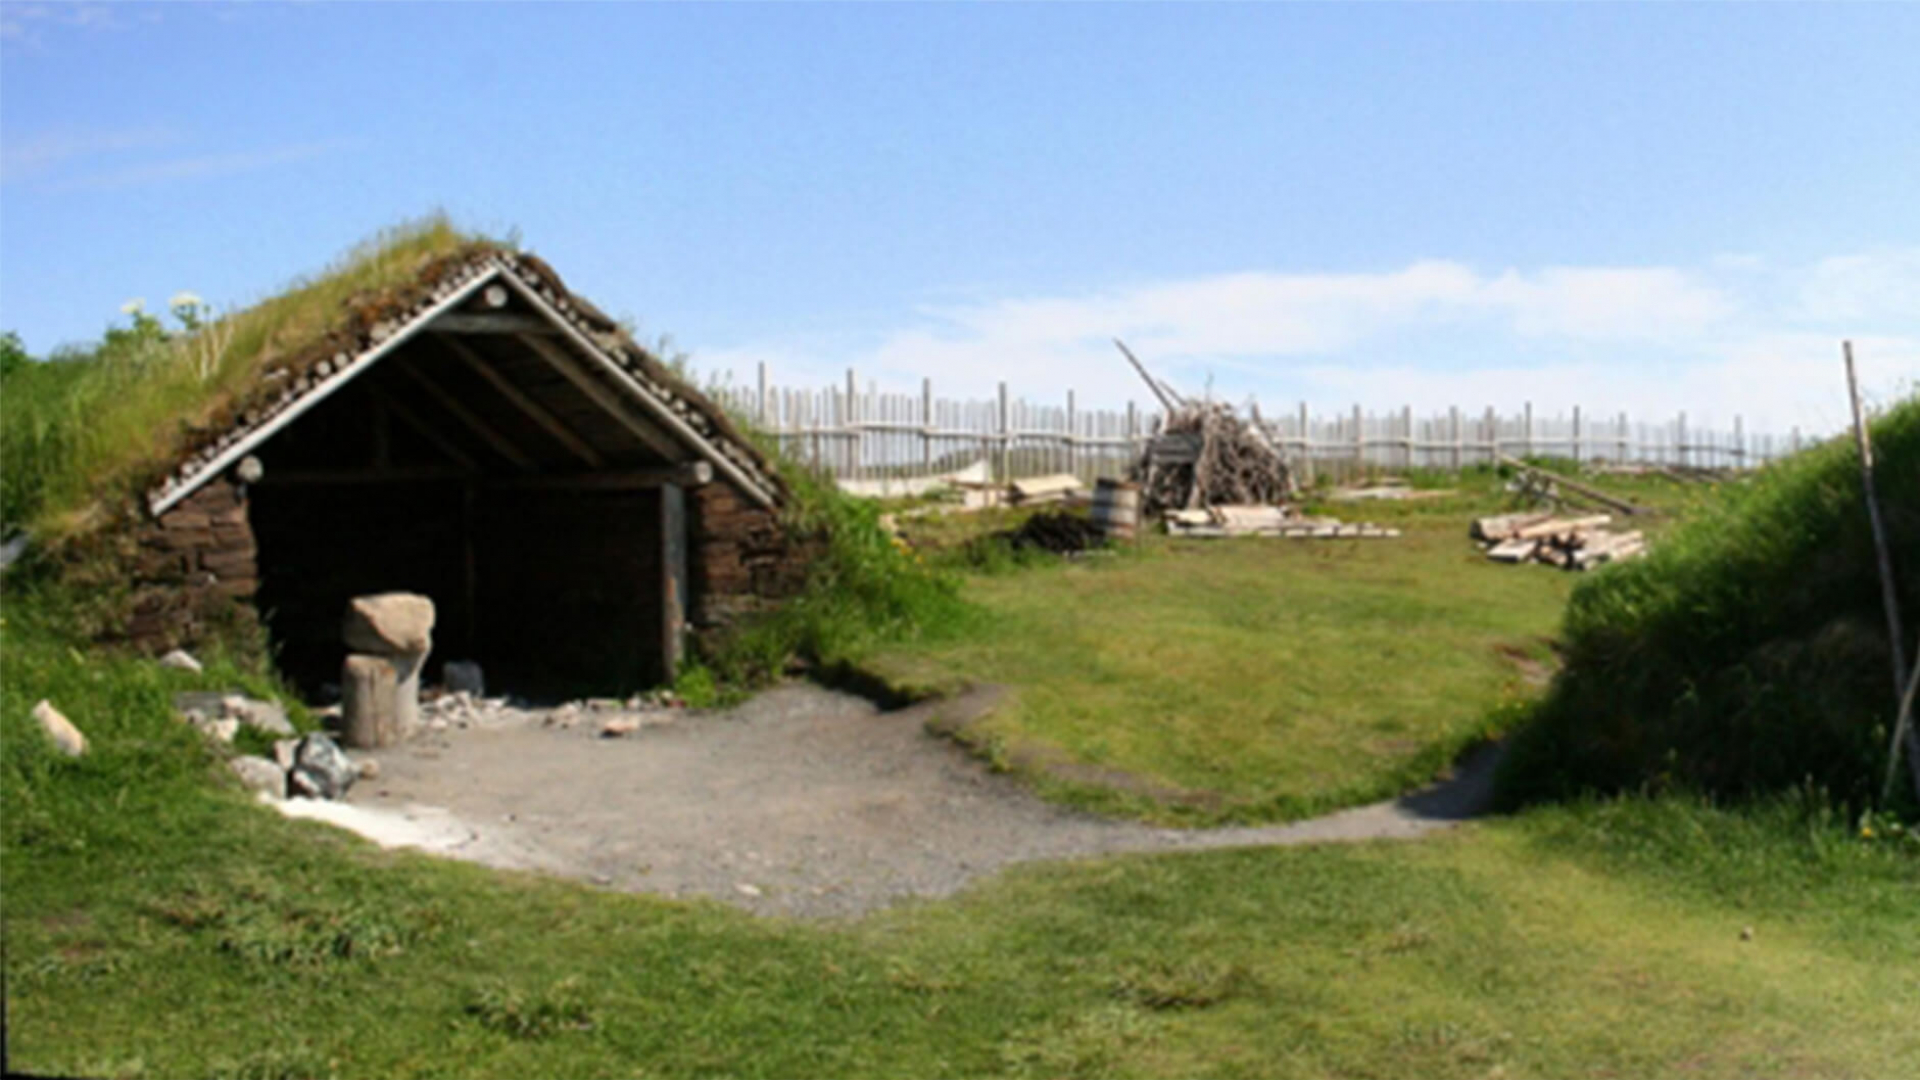 Shelter at L’Anse aux Meadows.